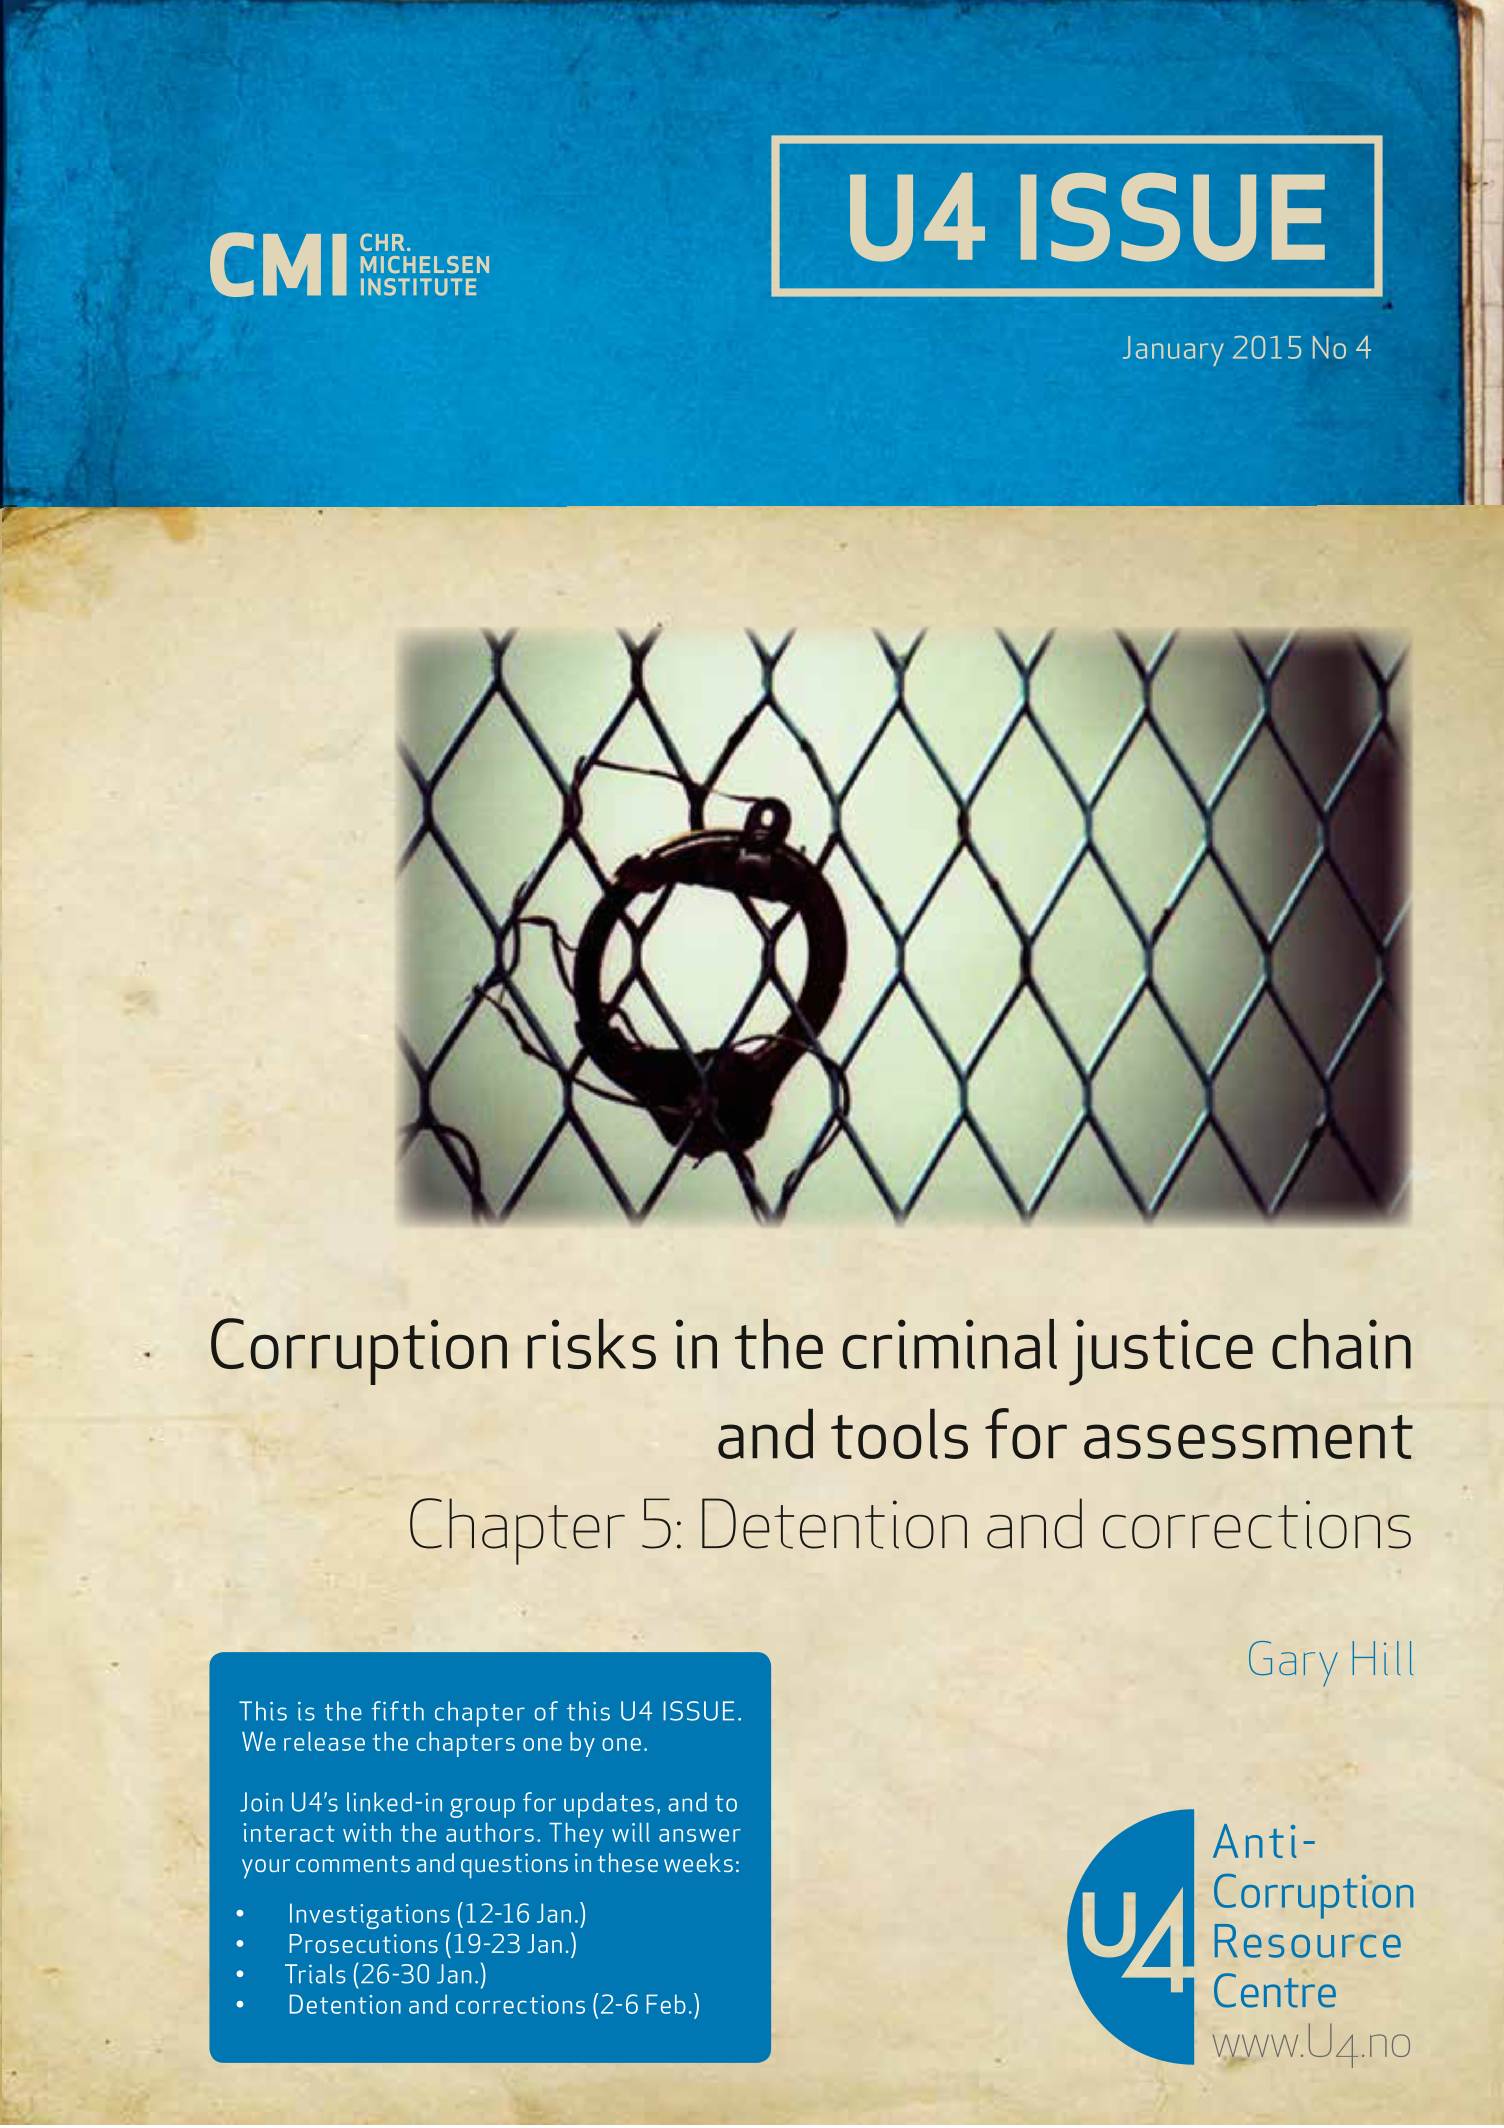 Corruption risks in the criminal justice chain and tools for assessment. Chapter 5: Detention and corrections